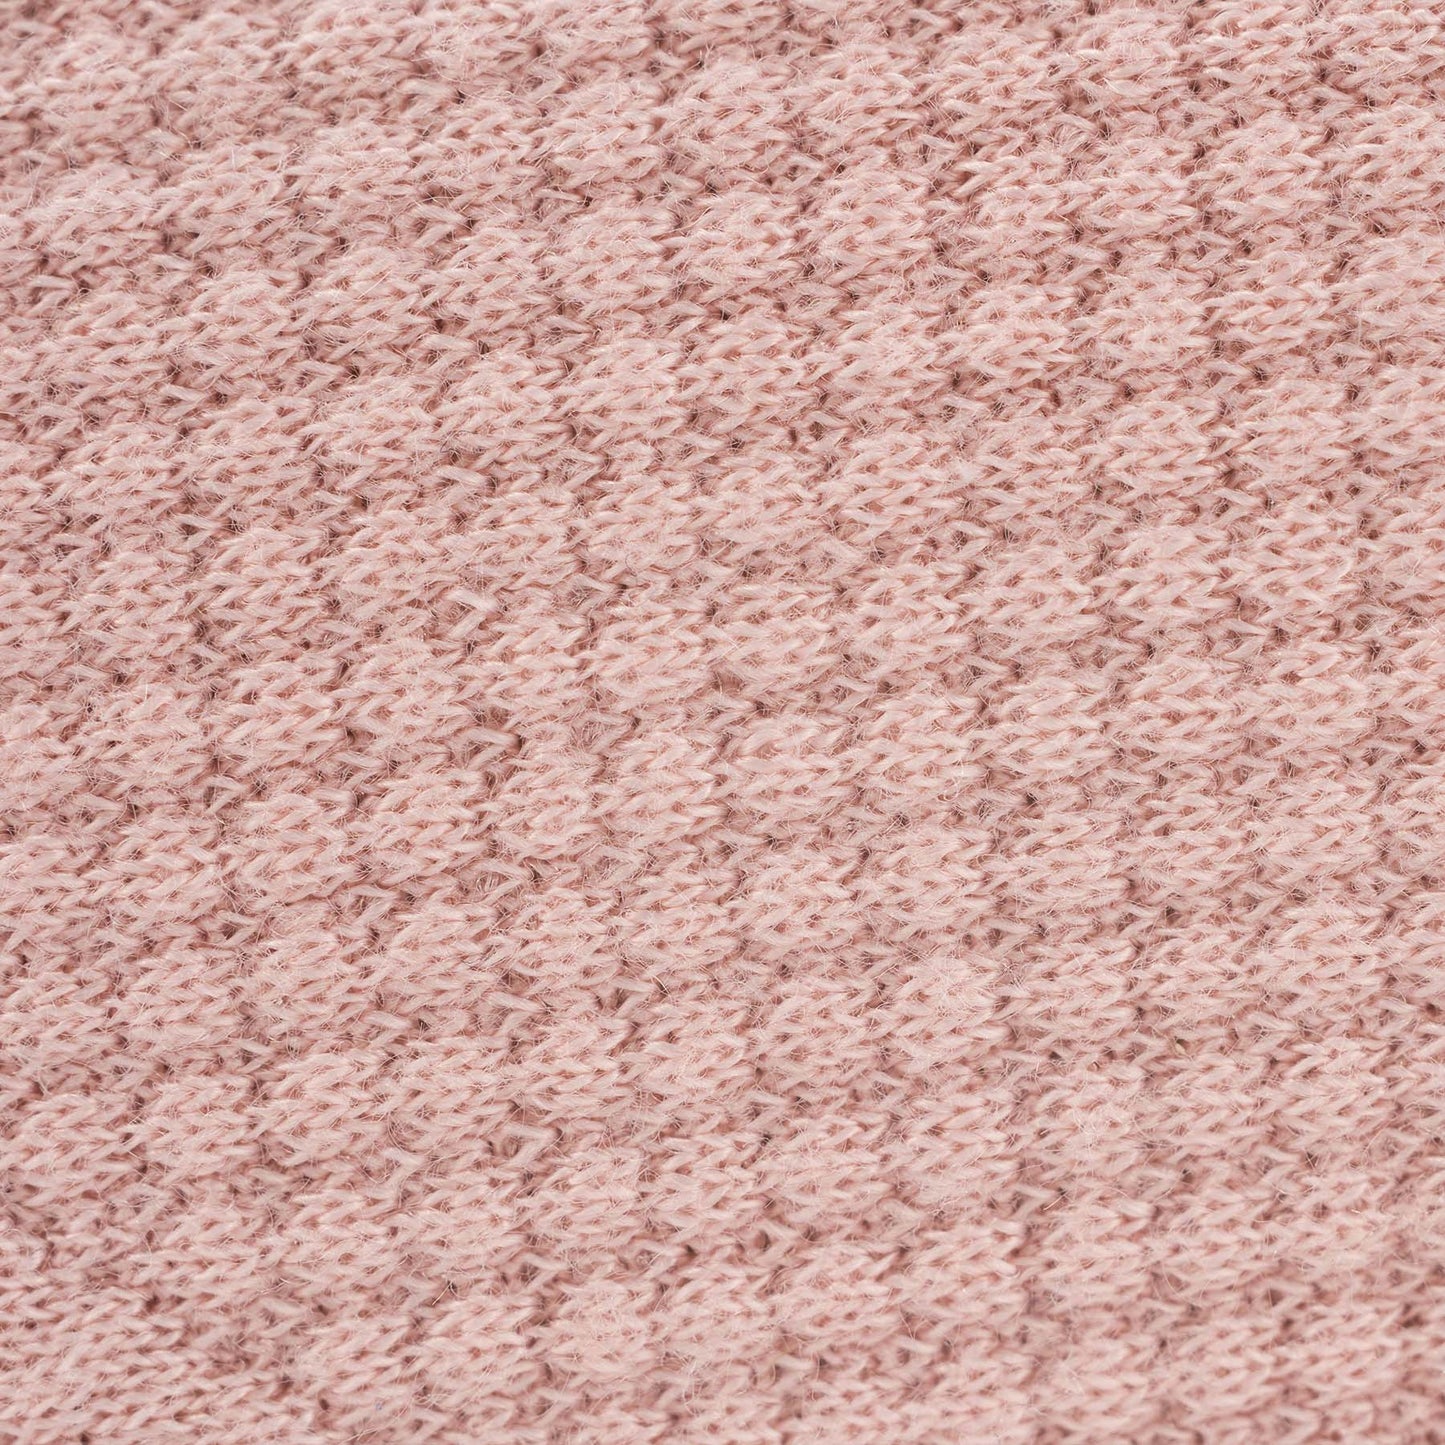 Personalized Knit Textured Pattern Baby Blanket - Rose